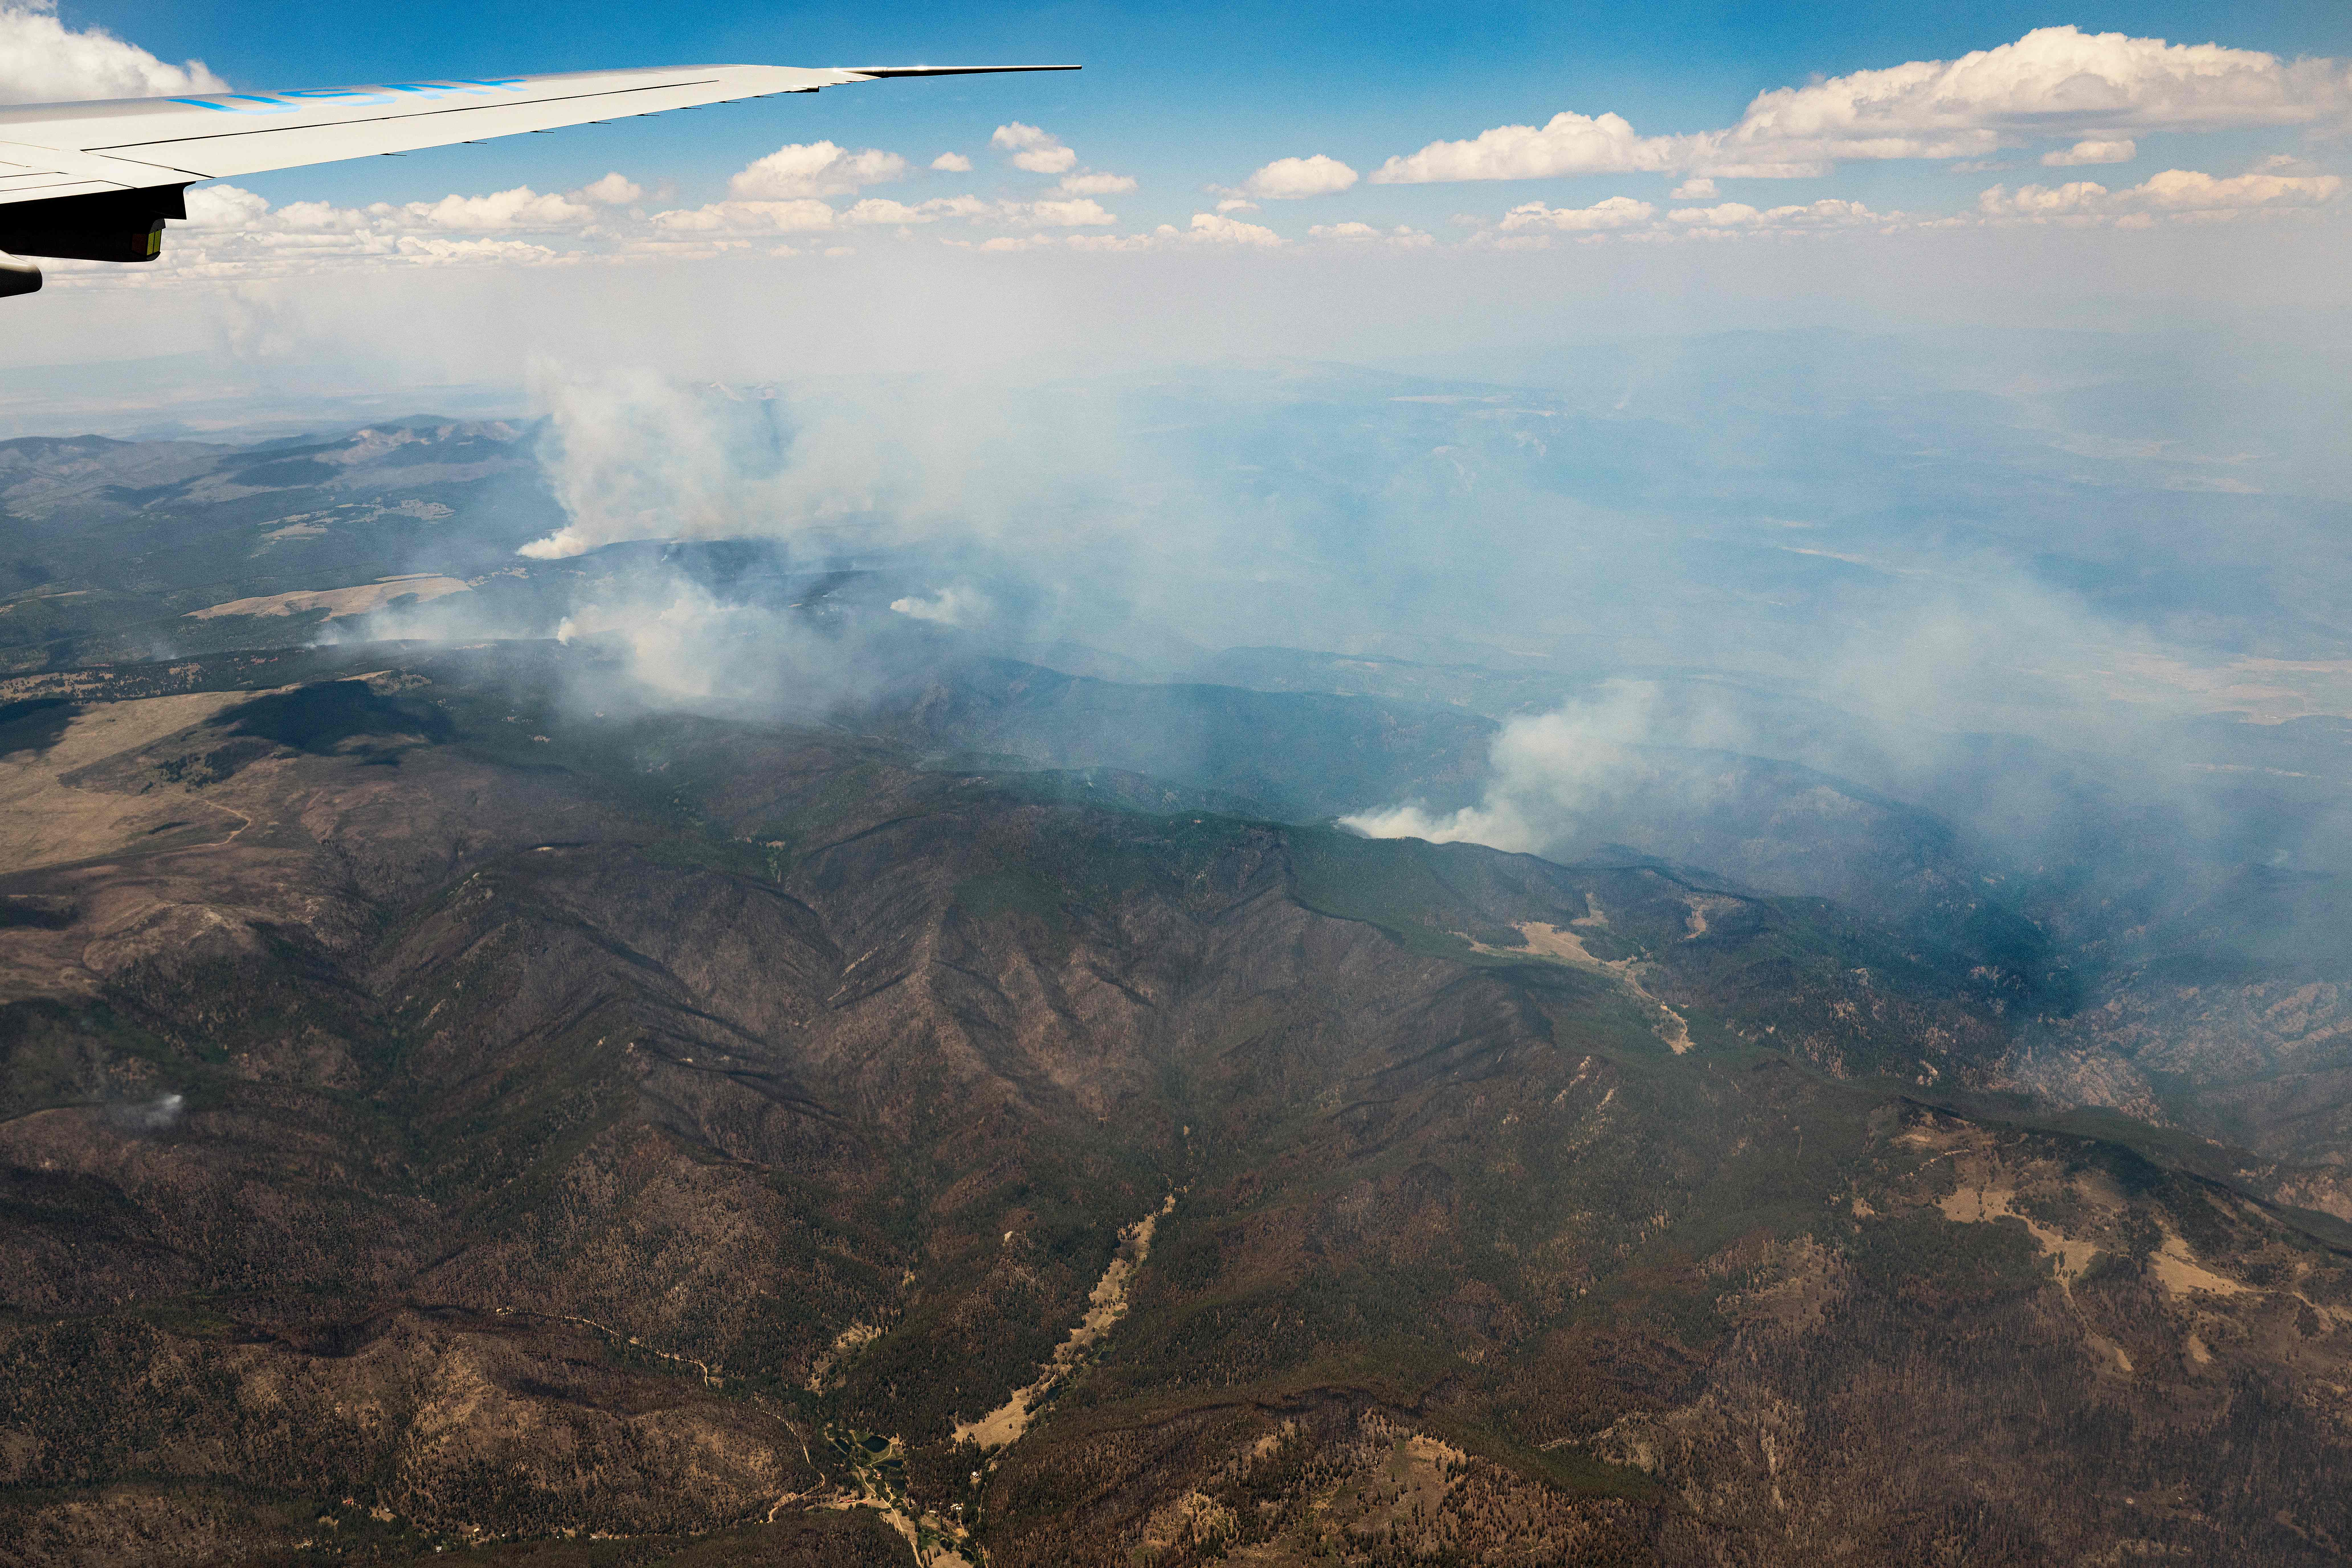 Air Force One, with US President Joe Biden, flies over New Mexico fires on June 11, 2022.